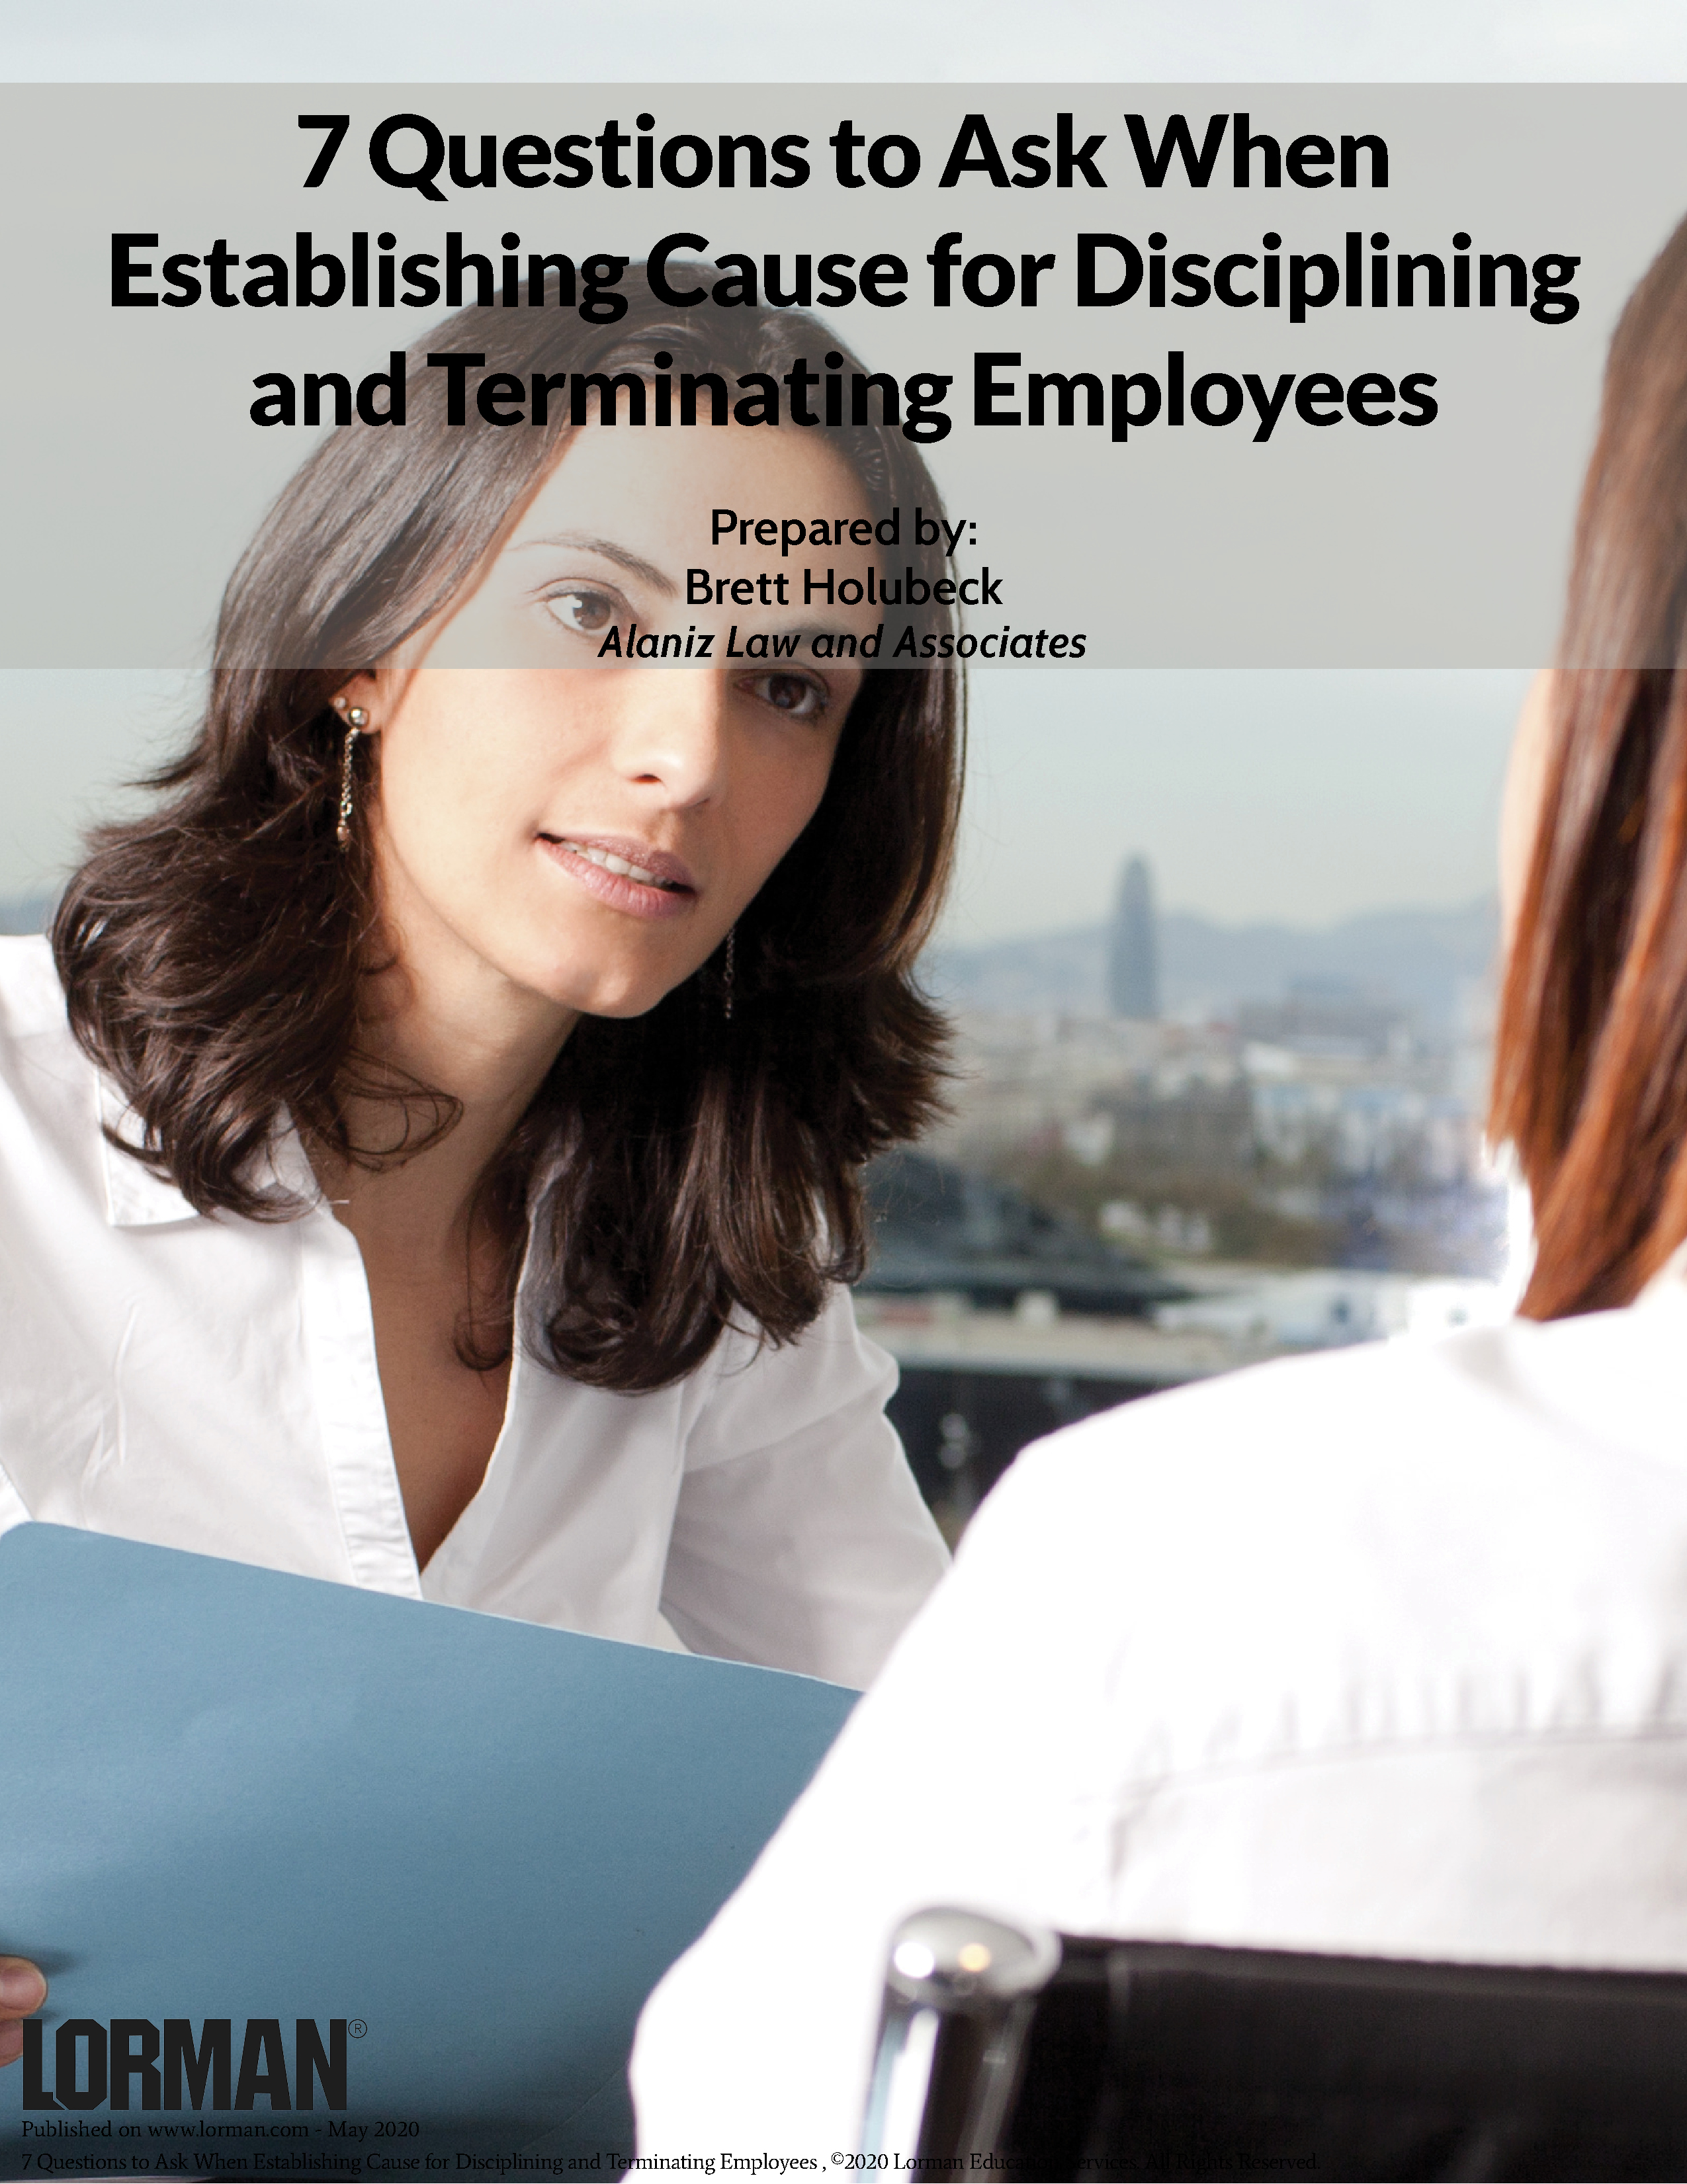 Seven Questions to Ask When Establishing Cause for Disciplining and Terminating Employees 